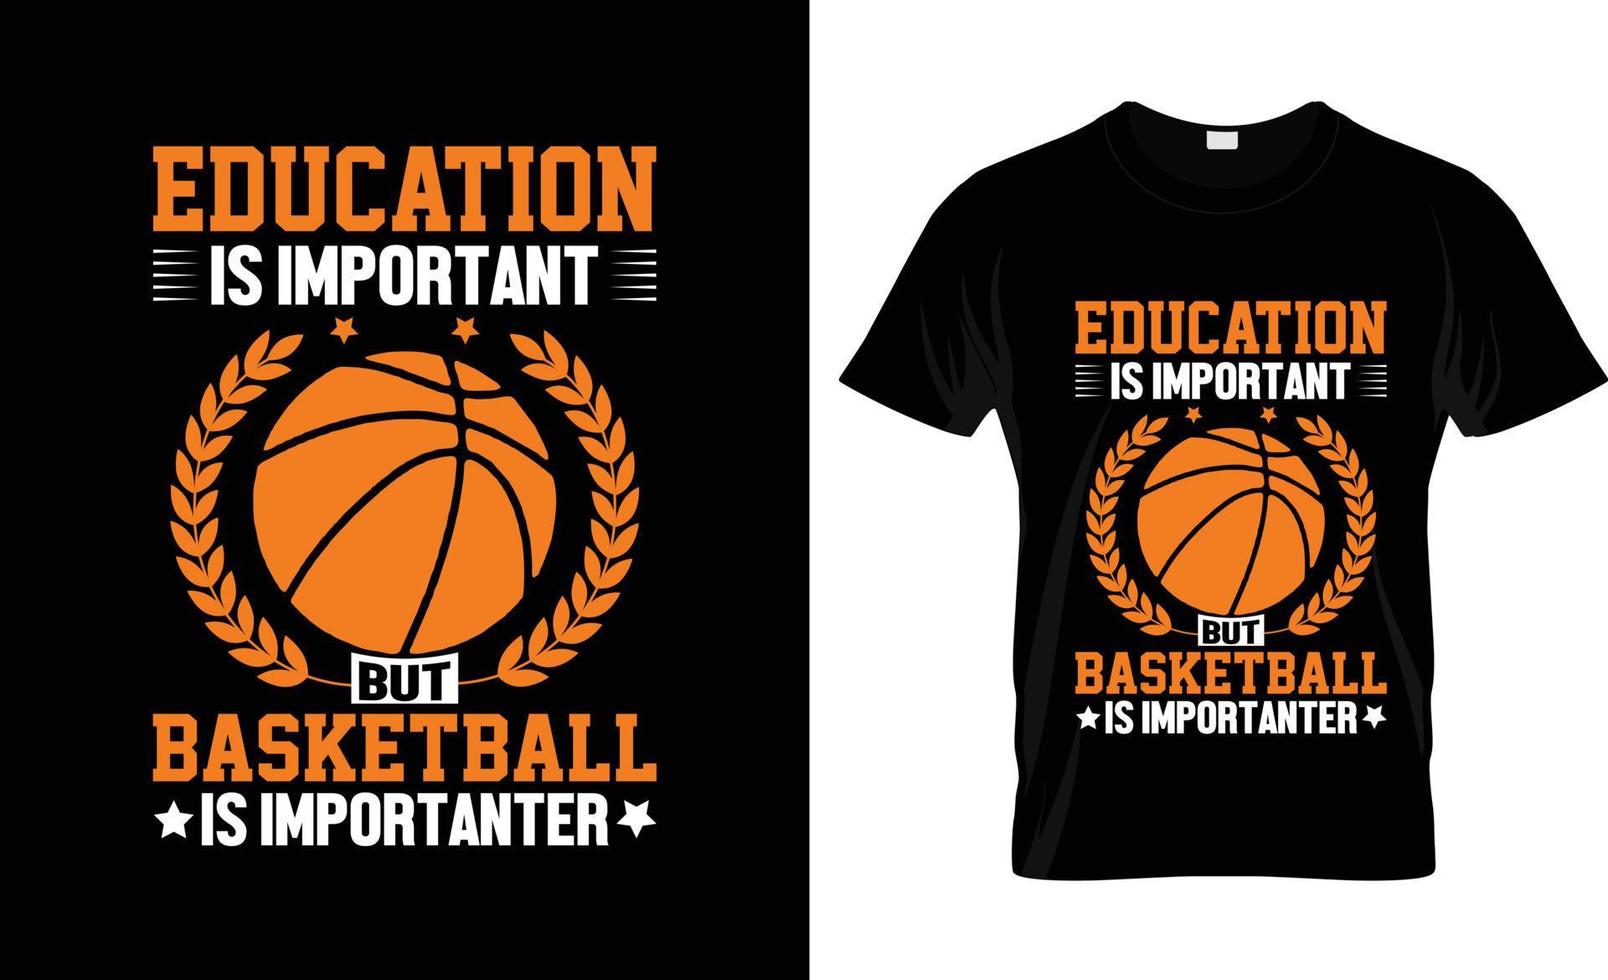 Education is important but Basketball t-shirt design, Basketball t-shirt slogan and apparel design, Basketball typography, Basketball vector, Basketball illustration vector